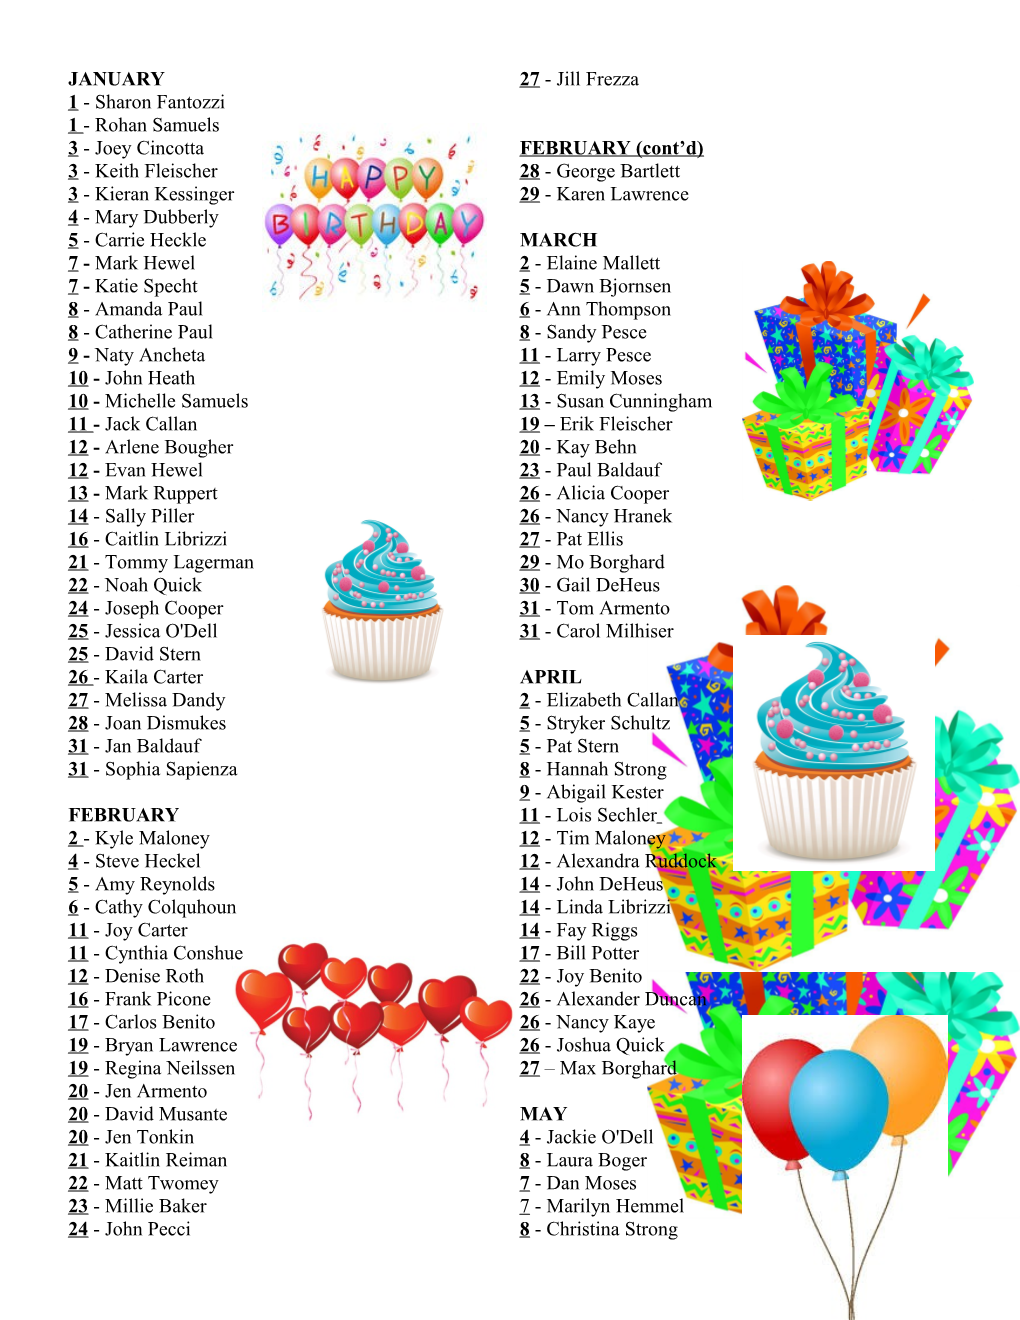 MUMC Happy Birthday Wishes to the Following People, As Well As to Everyone Who Celebrates